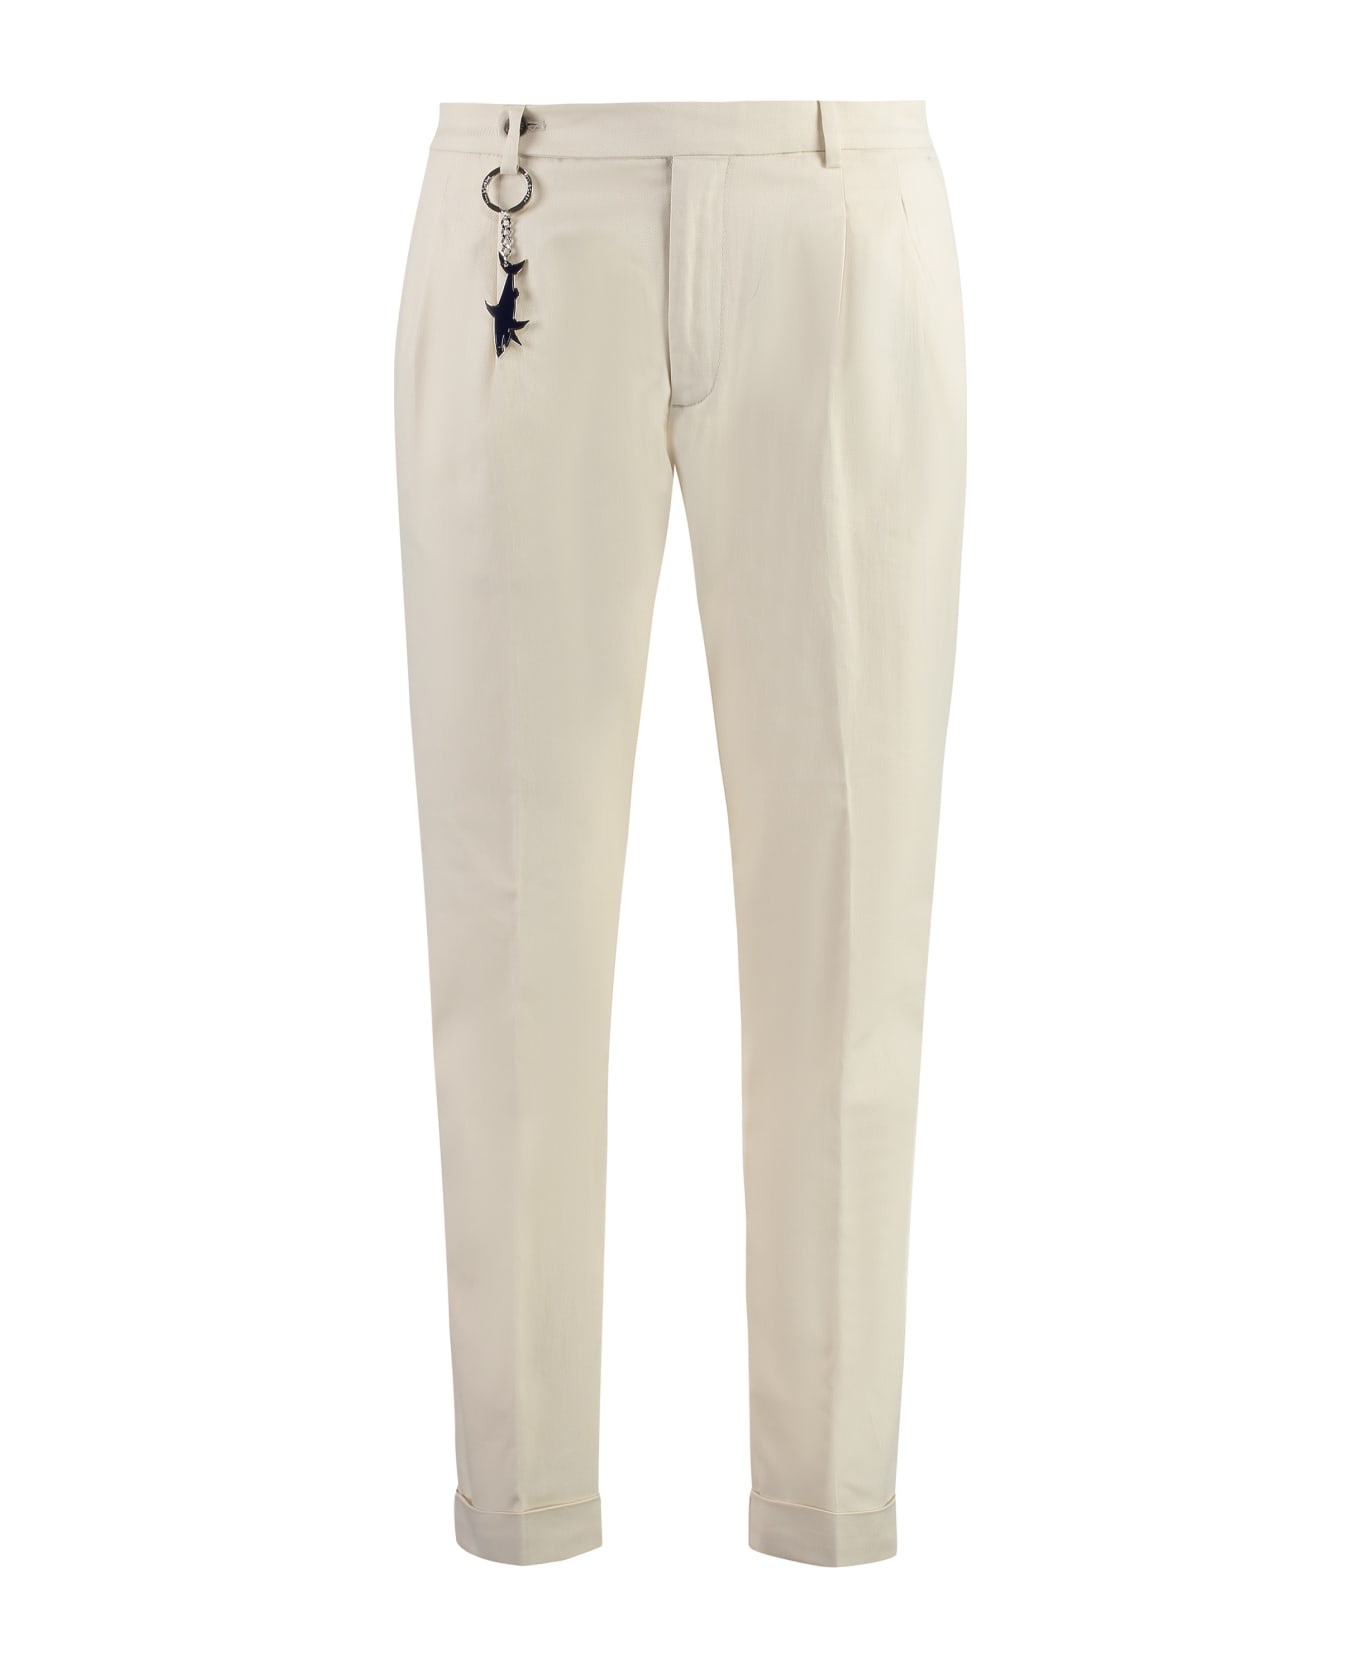 Paul&Shark Cotton Trousers - Ivory ボトムス